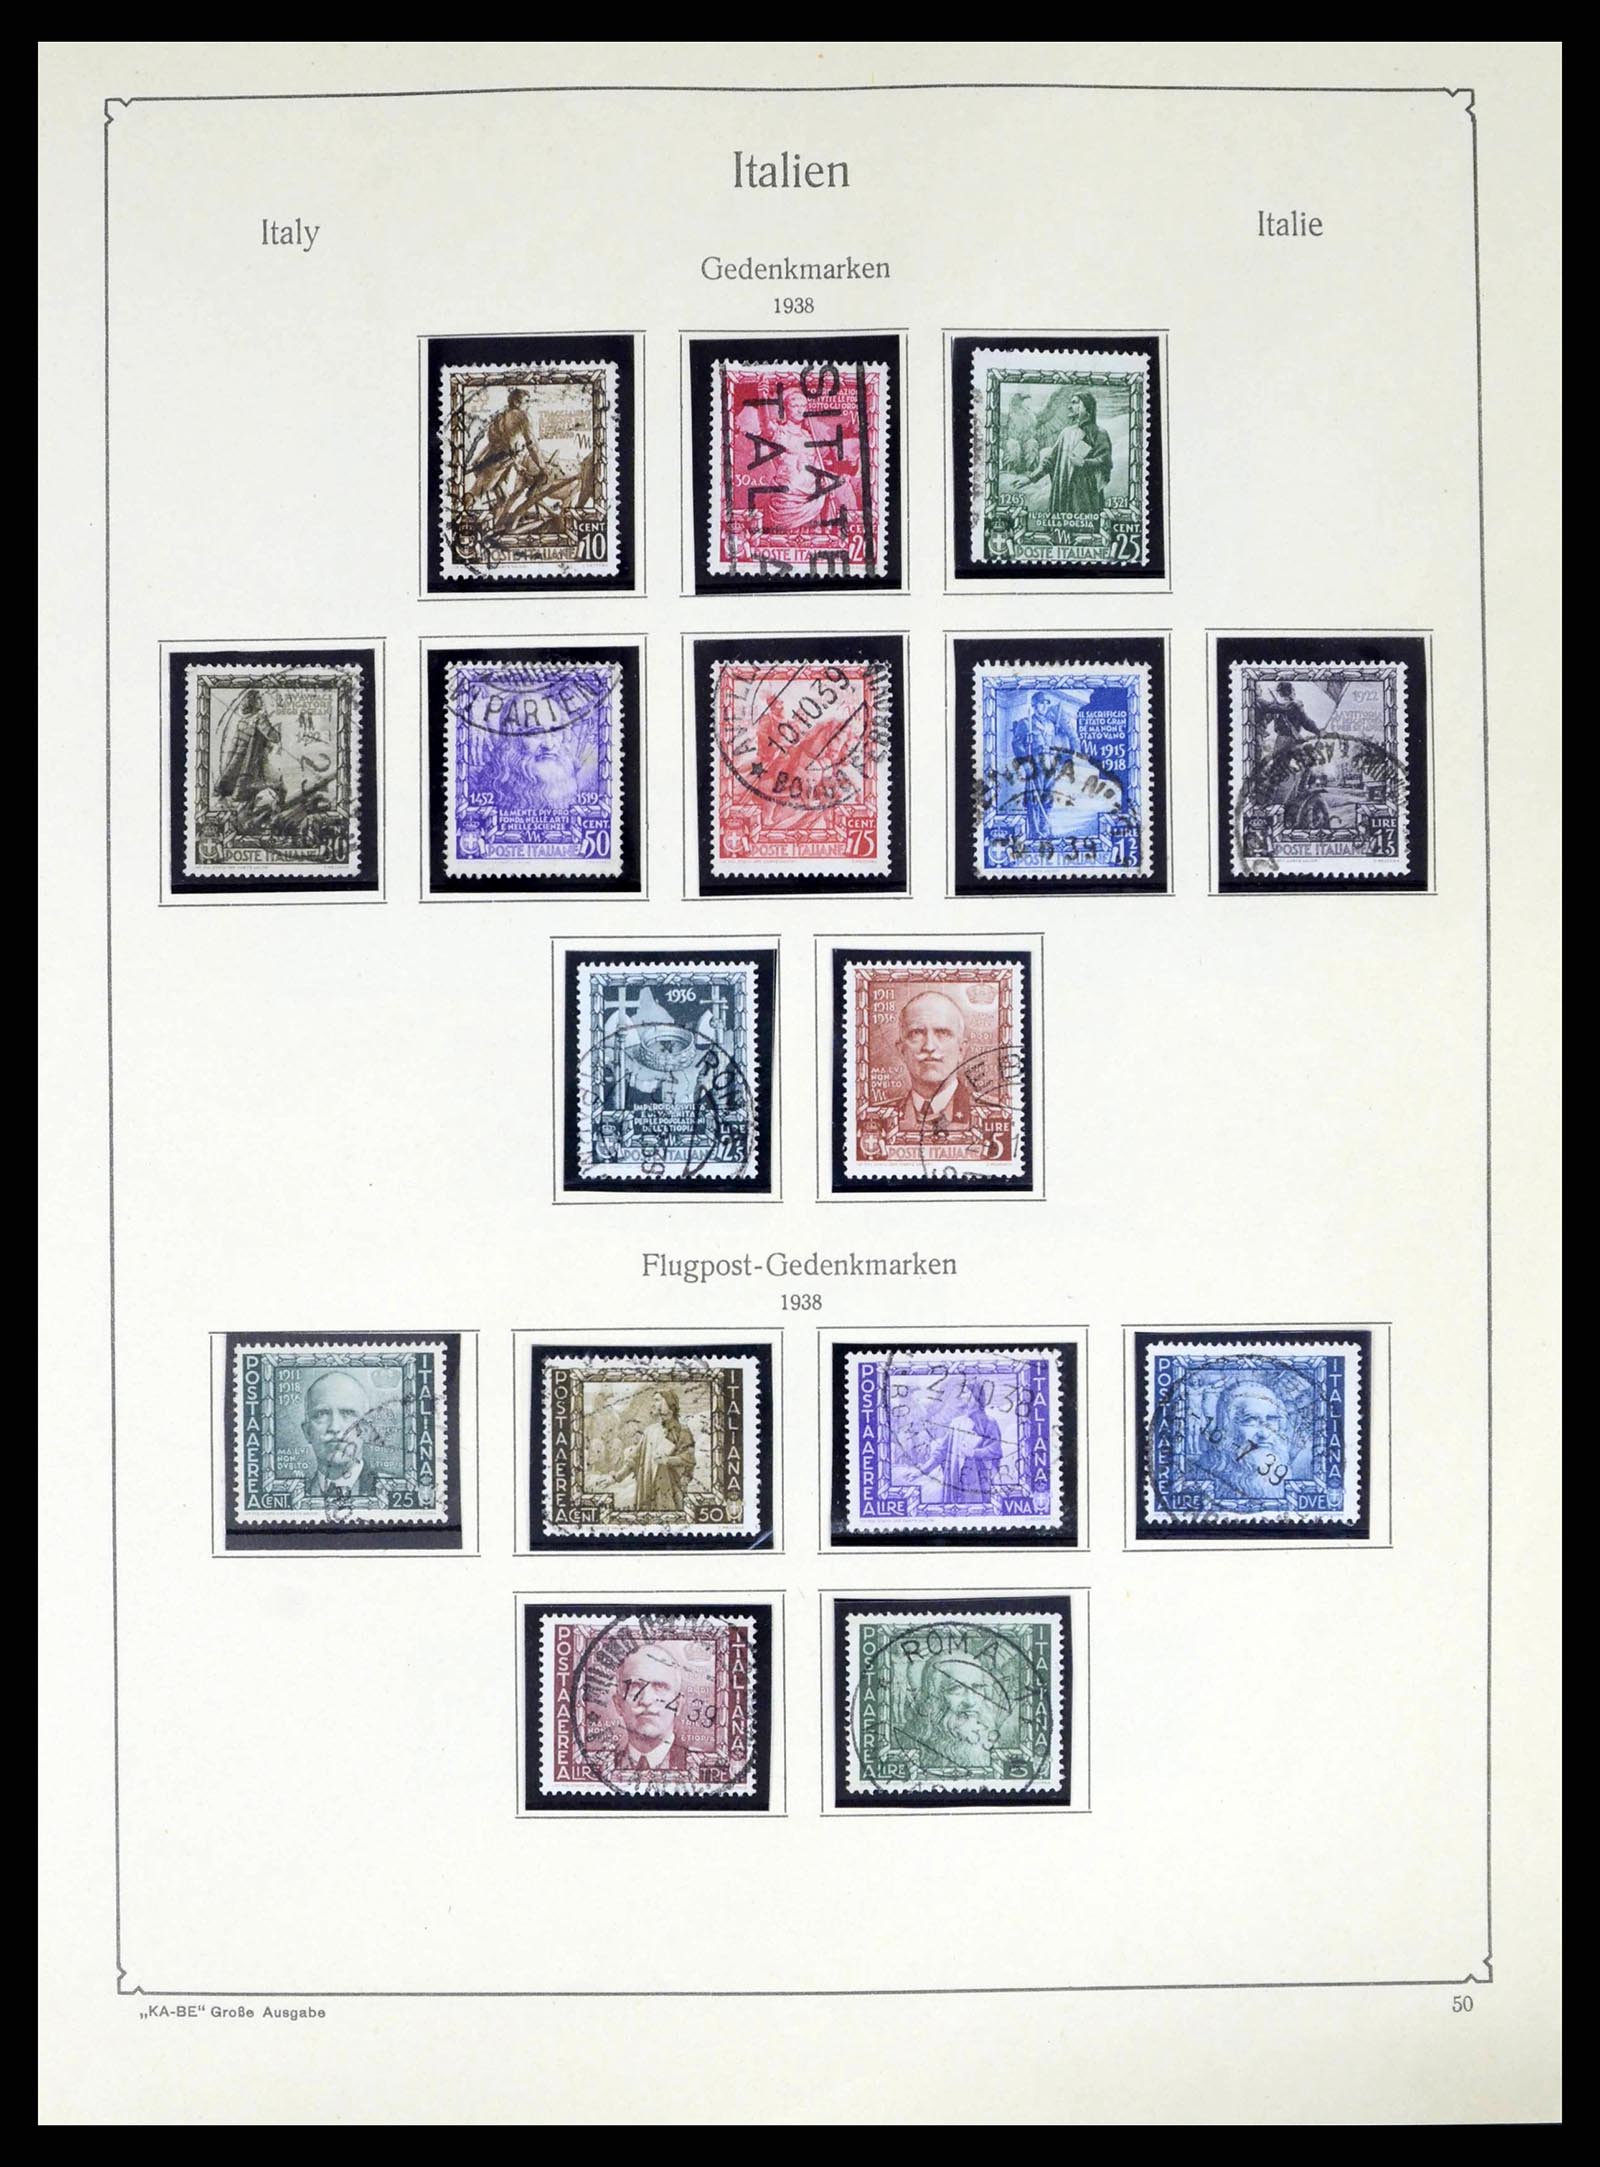 38220 0052 - Stamp collection 38220 Italy 1863-2010.